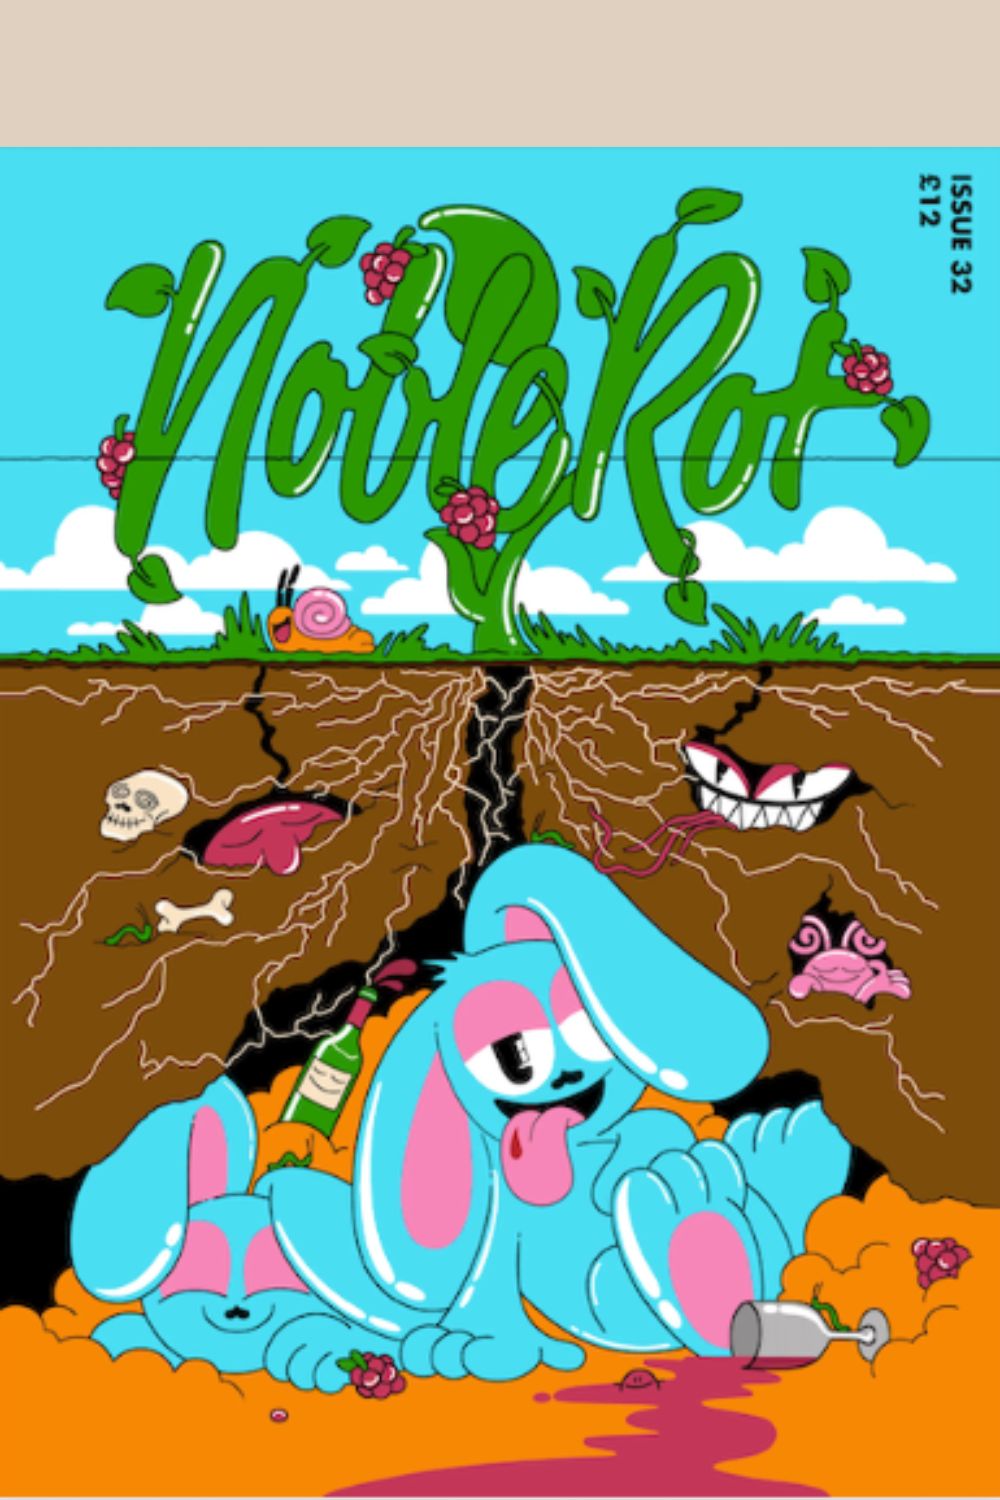 Noble Rot Issue 32